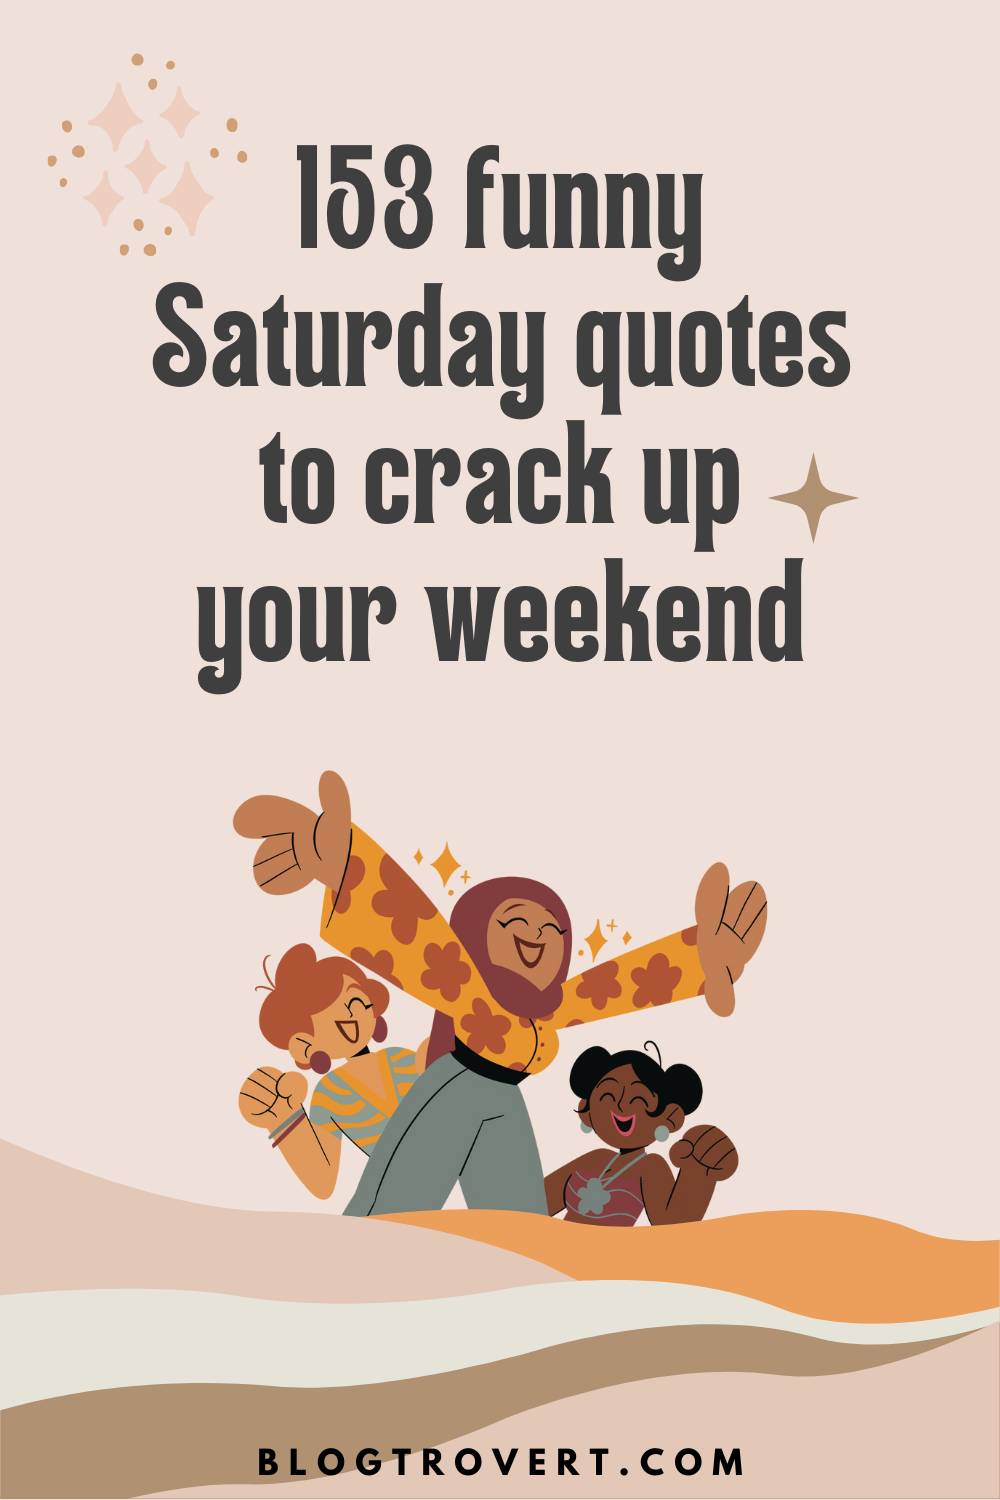 153 funny Saturday quotes to crack up your weekend 12